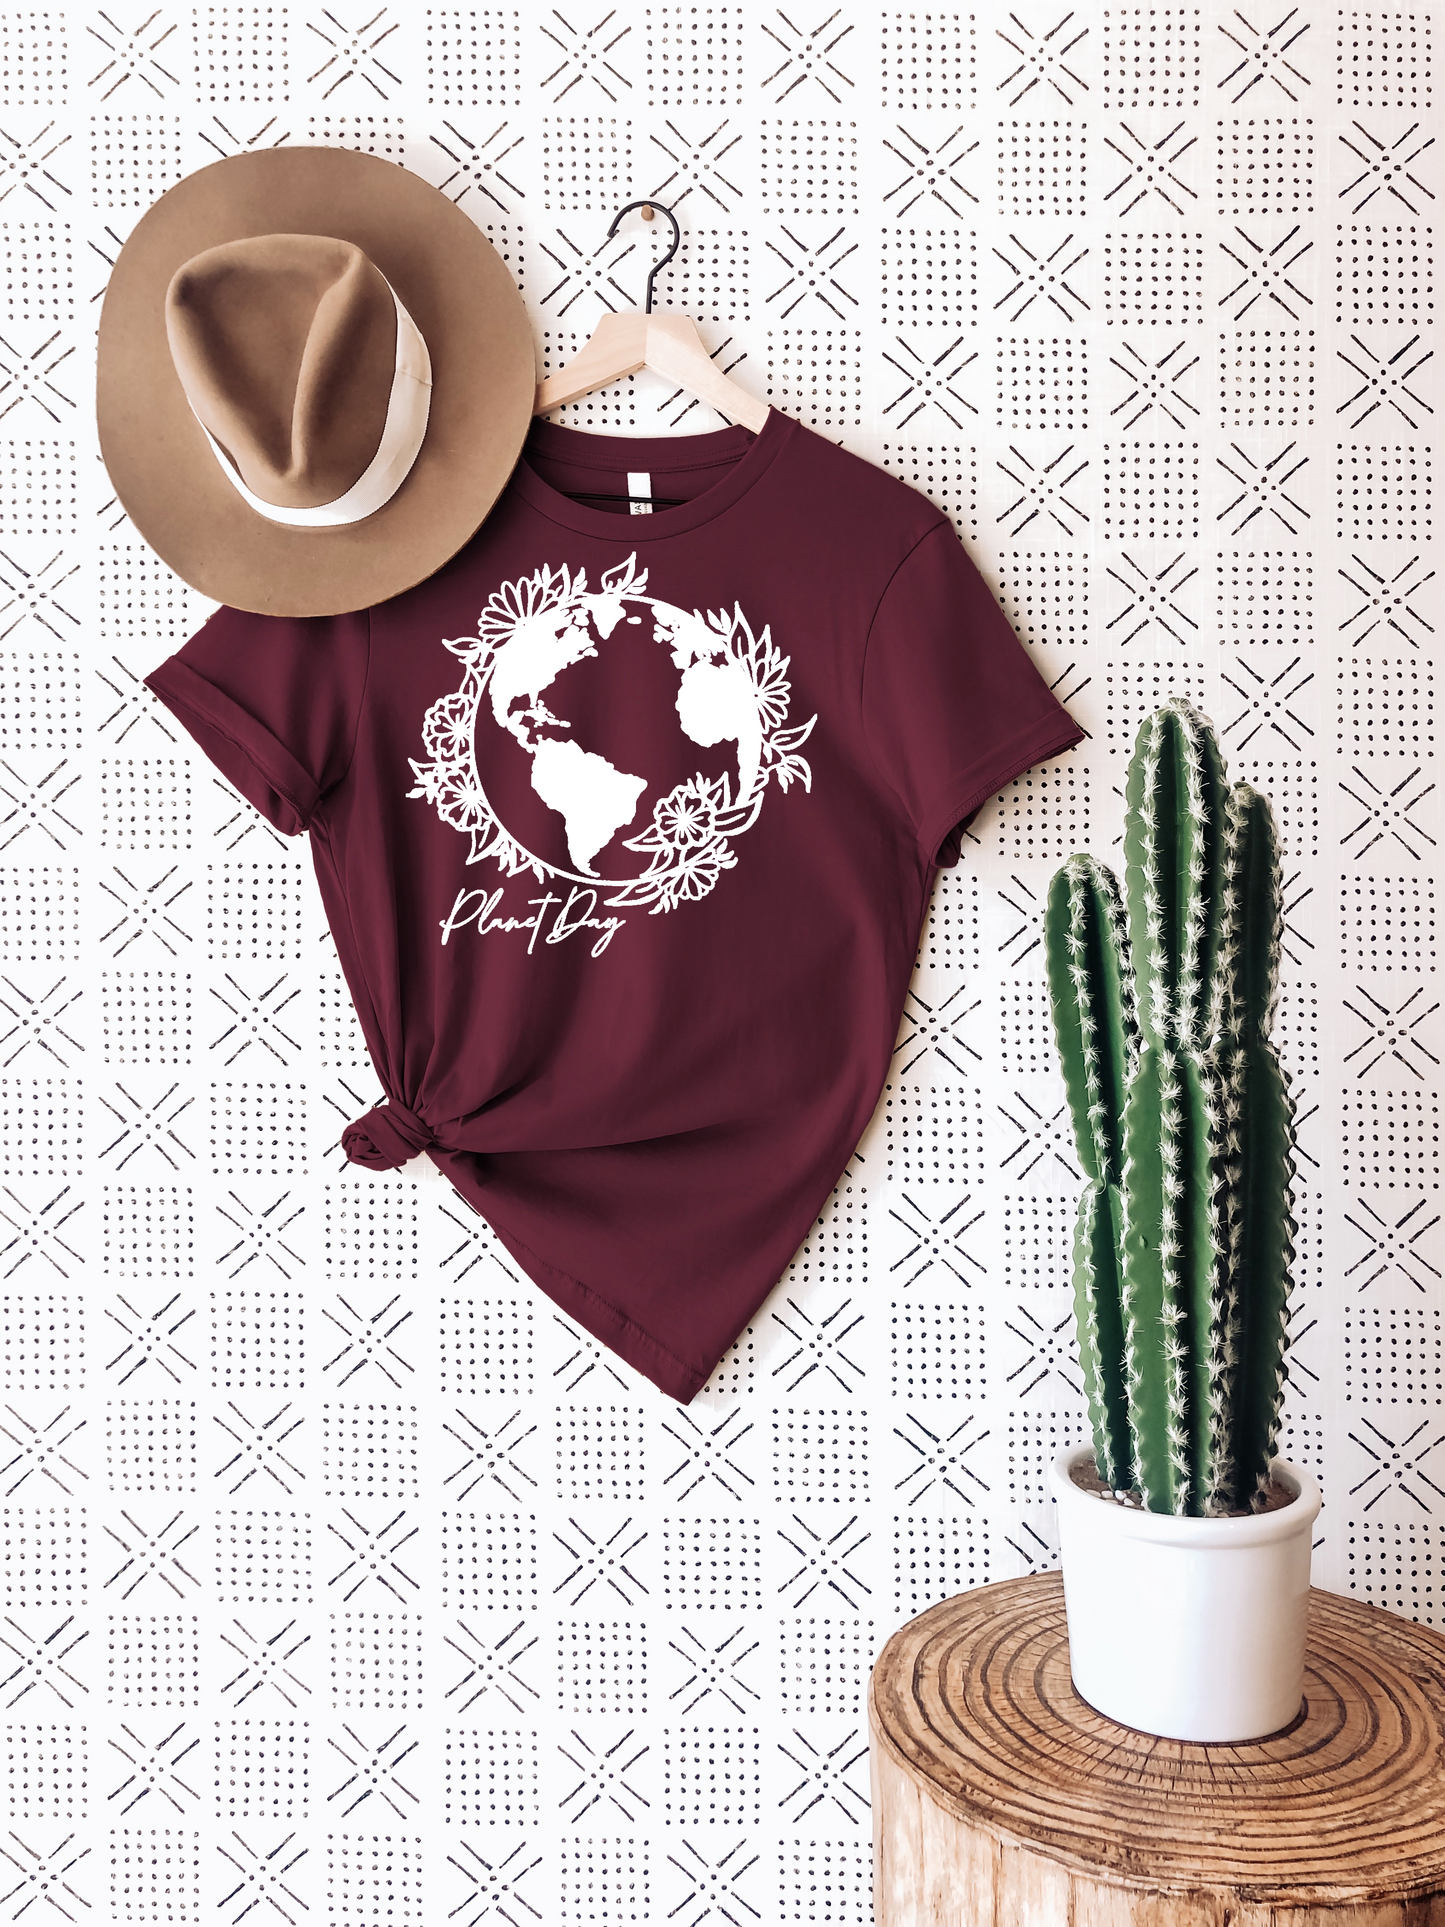 Planet Day T-Shirt